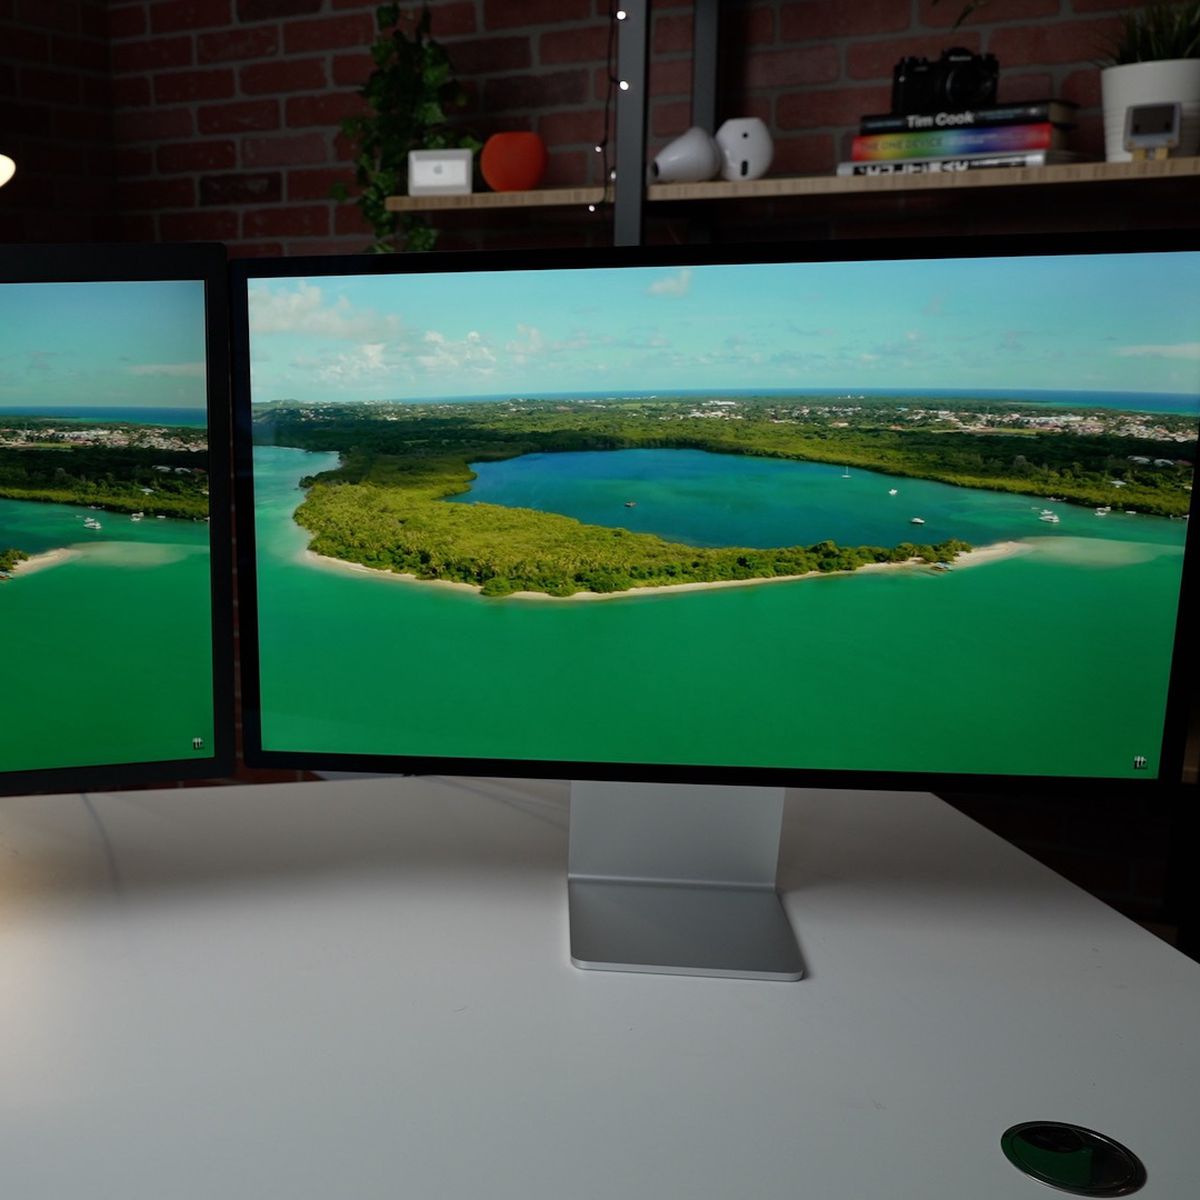 Review: Using LG's UltraFine 4K Display with Apple's USB-C